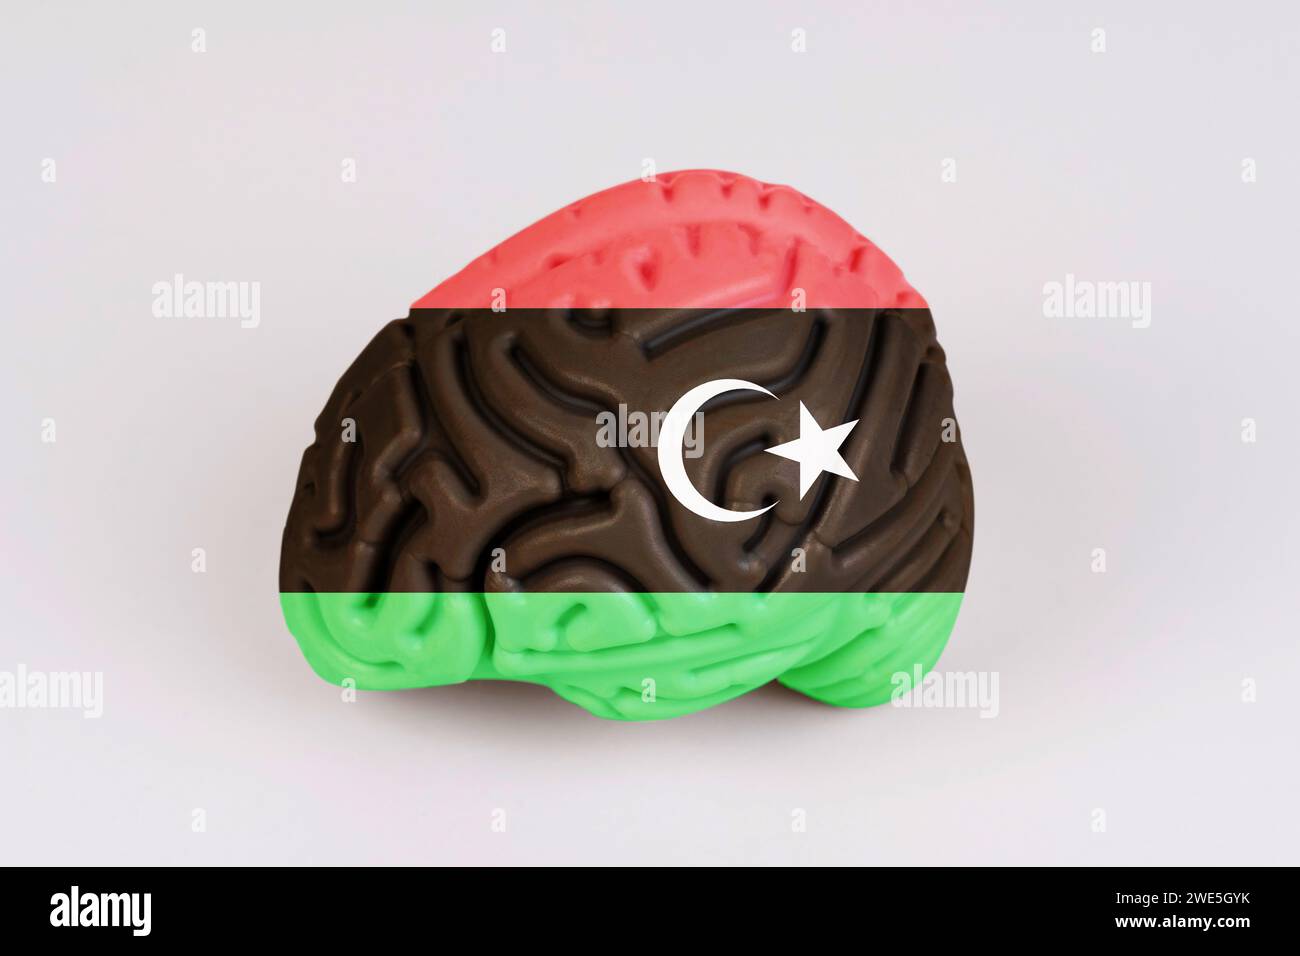 On a white background, a model of the brain with a picture of a flag - Libya. Close-up Stock Photo